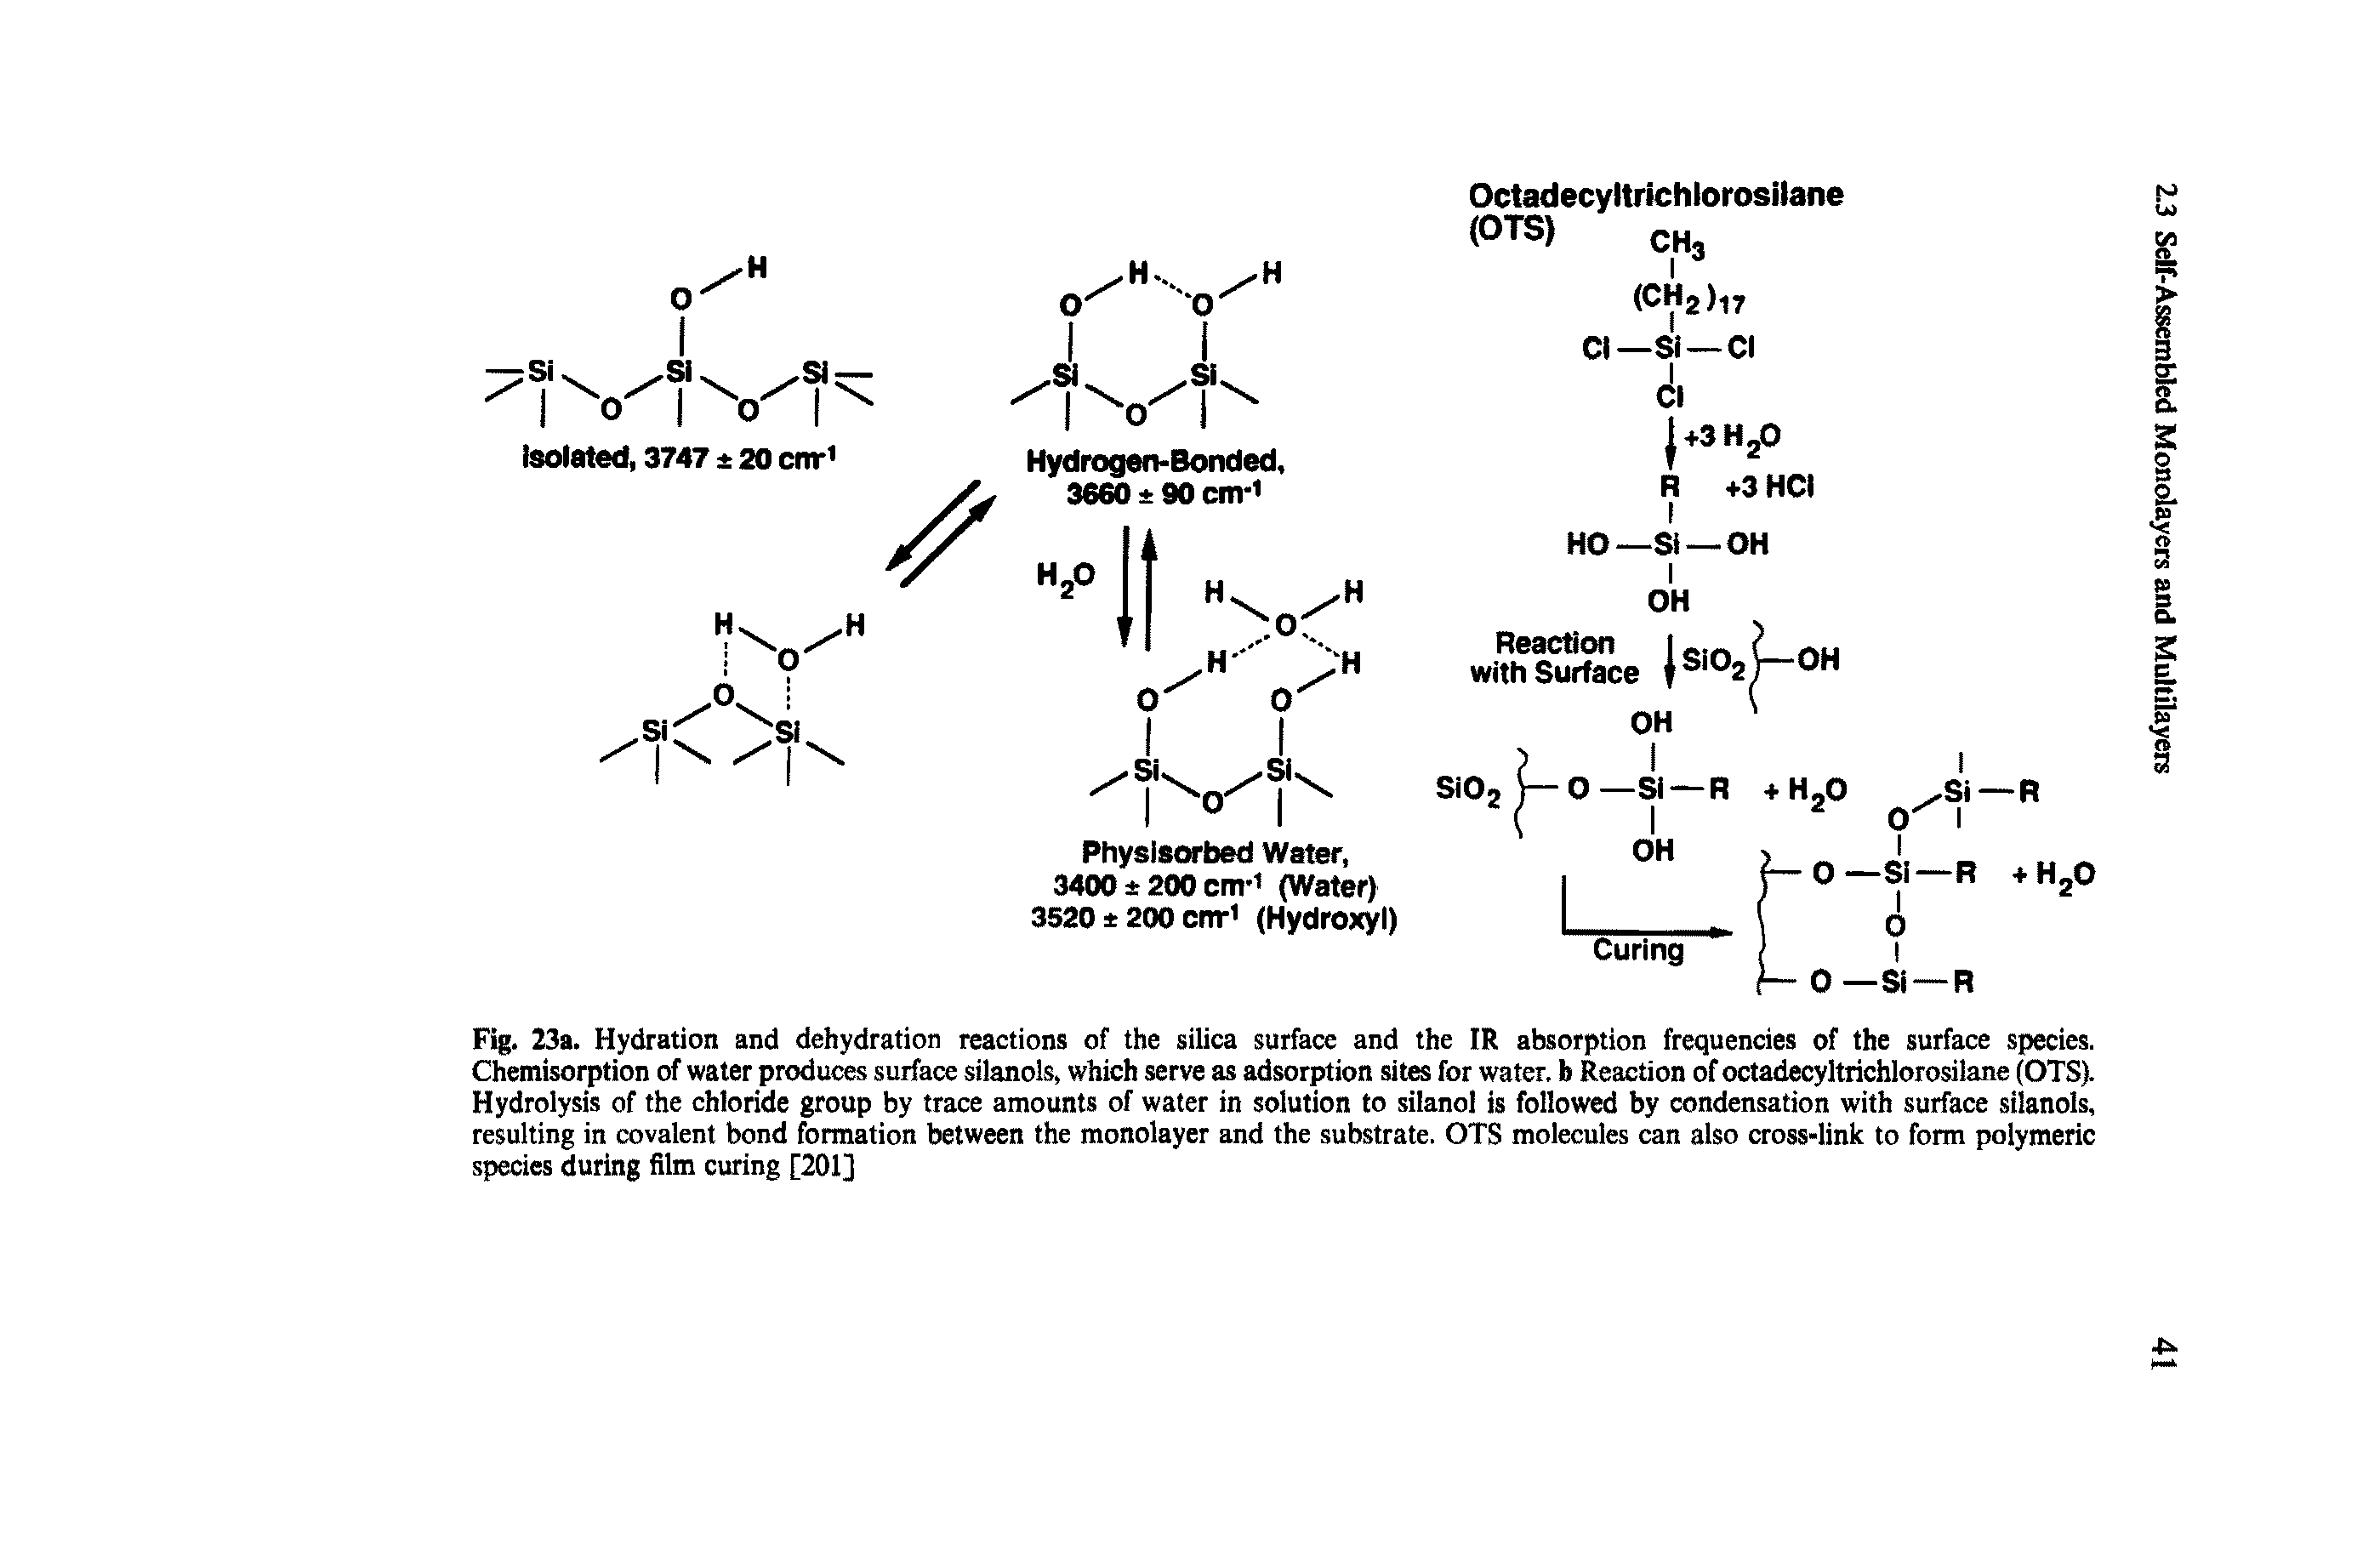 Fig. 23a. Hydration and dehydration reactions of the silica surface and the IR absorption frequencies of the surface species. Chemisorption of water produces surface silanols, which serve as adsorption sites for water, b Reaction of octadecyltrichlorosilane (OTS). Hydrolysis of the chloride group by trace amounts of water in solution to silanol is followed by condensation with surface silanols, resulting in covalent bond formation between the monolayer and the substrate. OTS molecules can also cross-link to form polymeric species during film curing [201]...